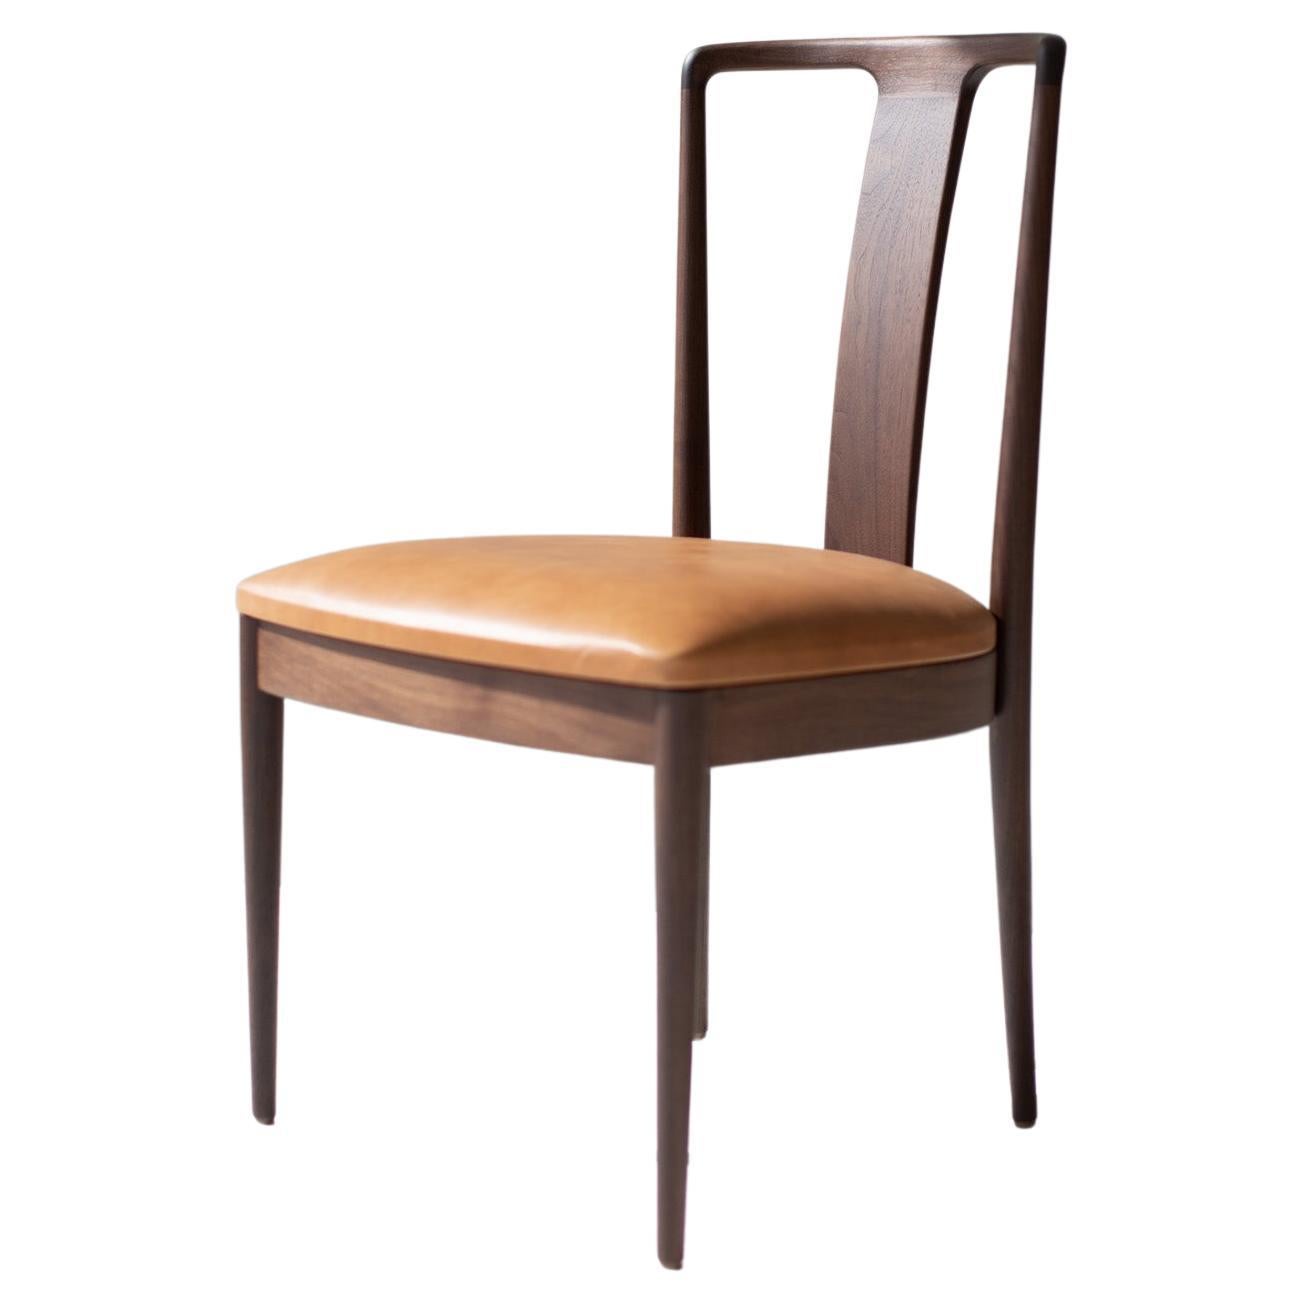 Derby Dining Chairs, Modern Wood Dining Chairs, Walnut, Leather, Peabody, Craft